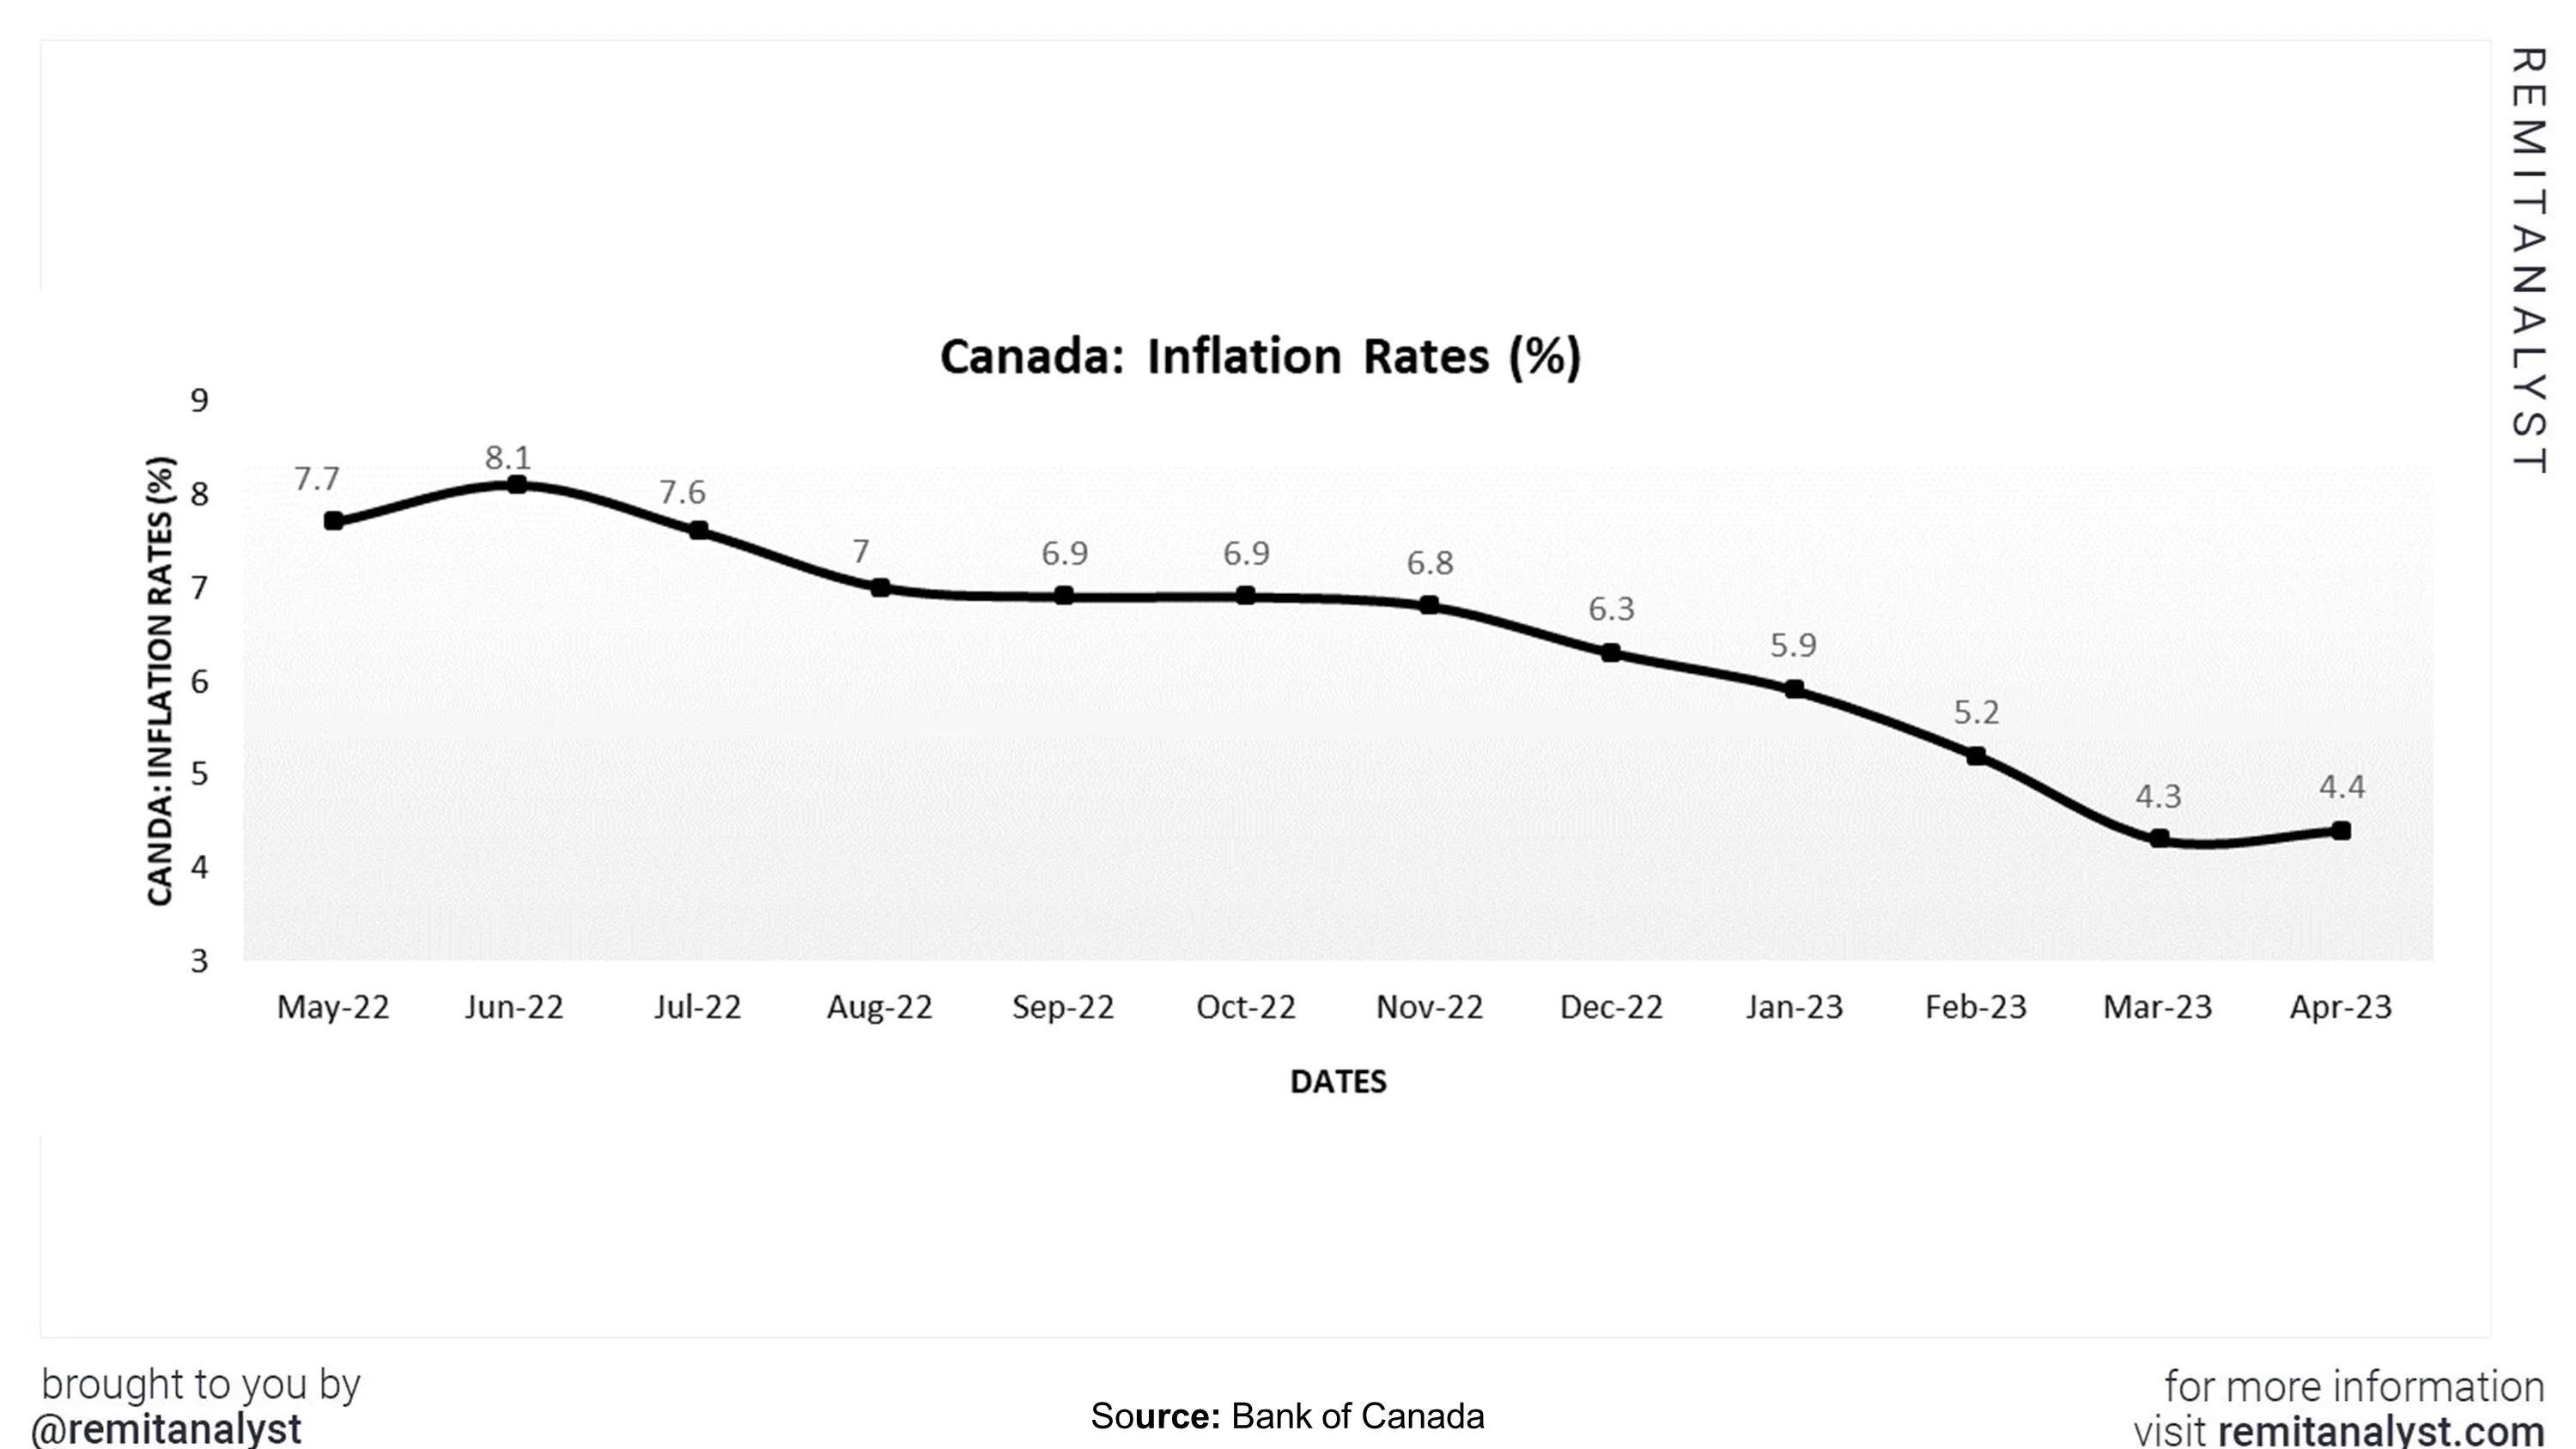 inflation-rates-canada-from-mar-2022-to-apr-2023